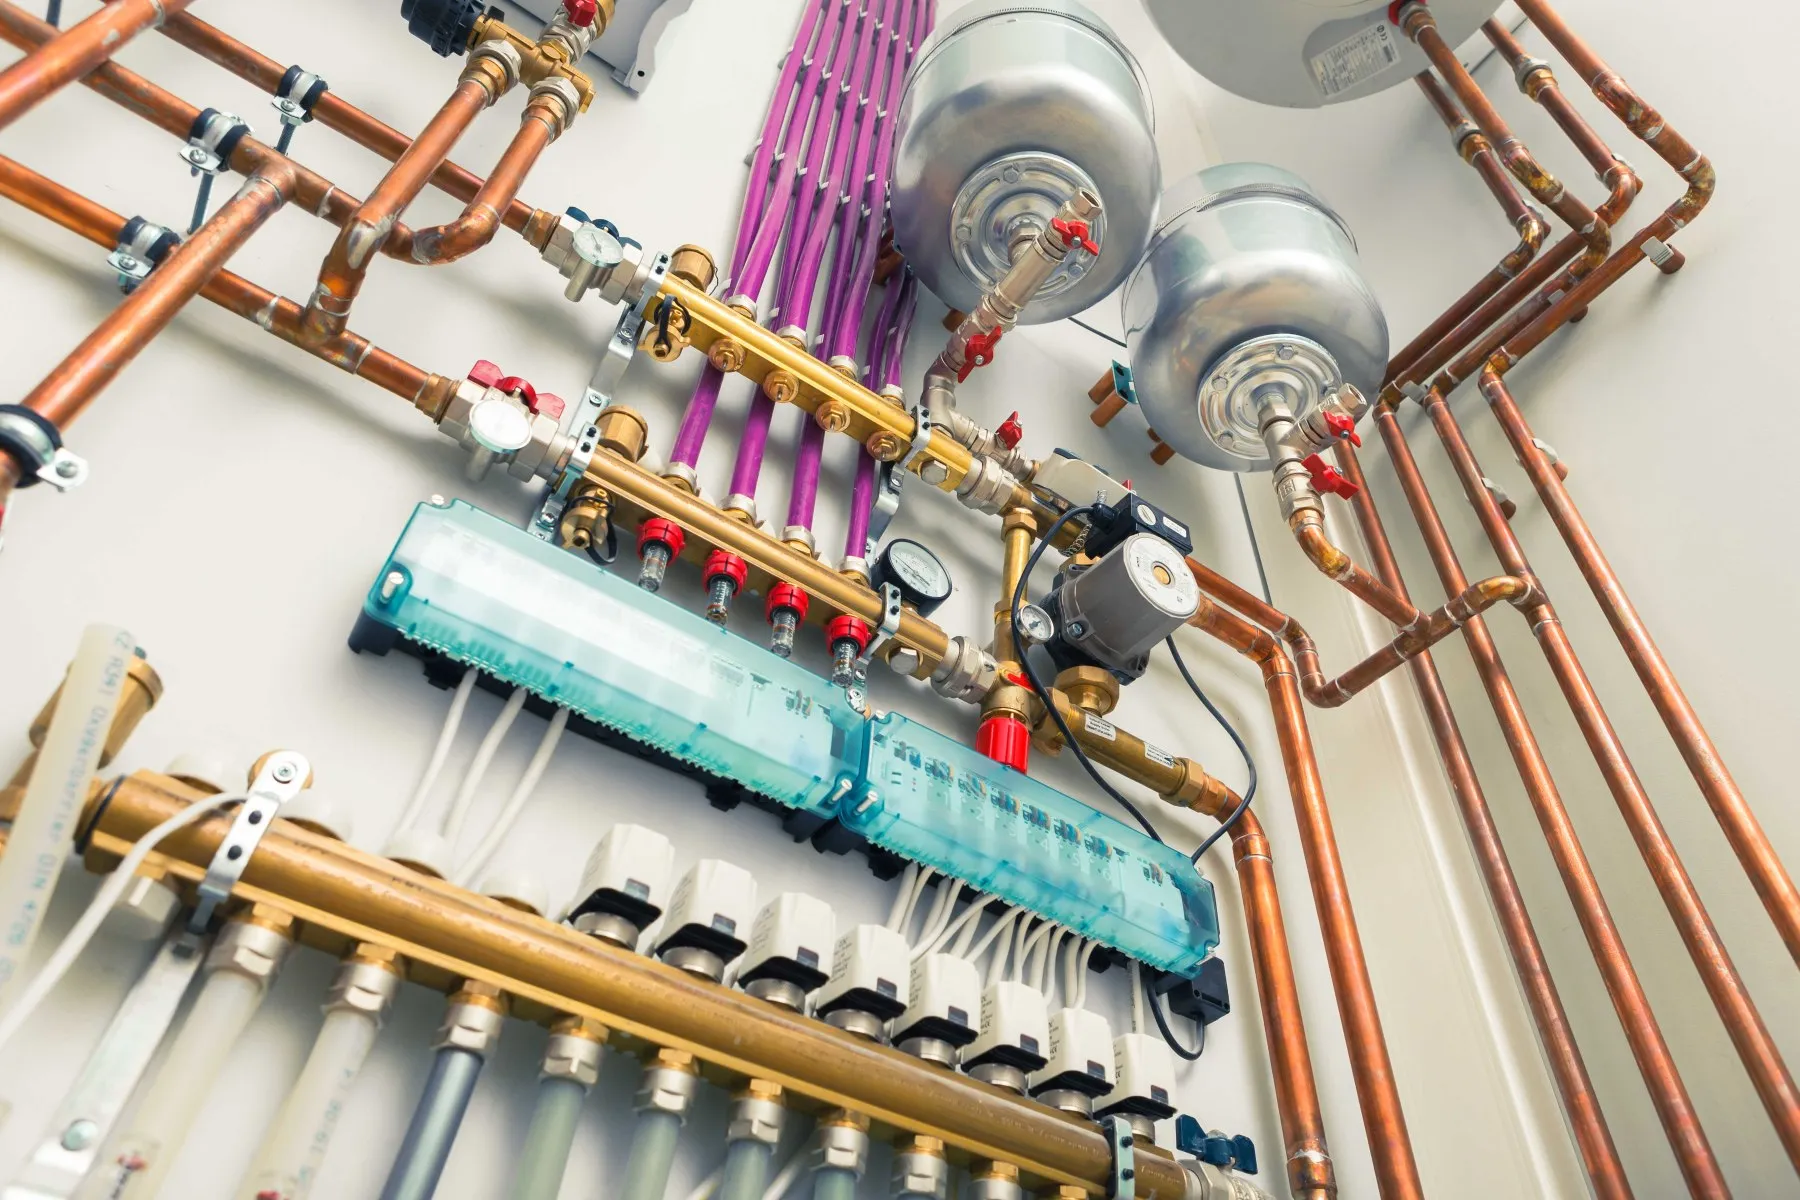 Plumbing pipes and valves